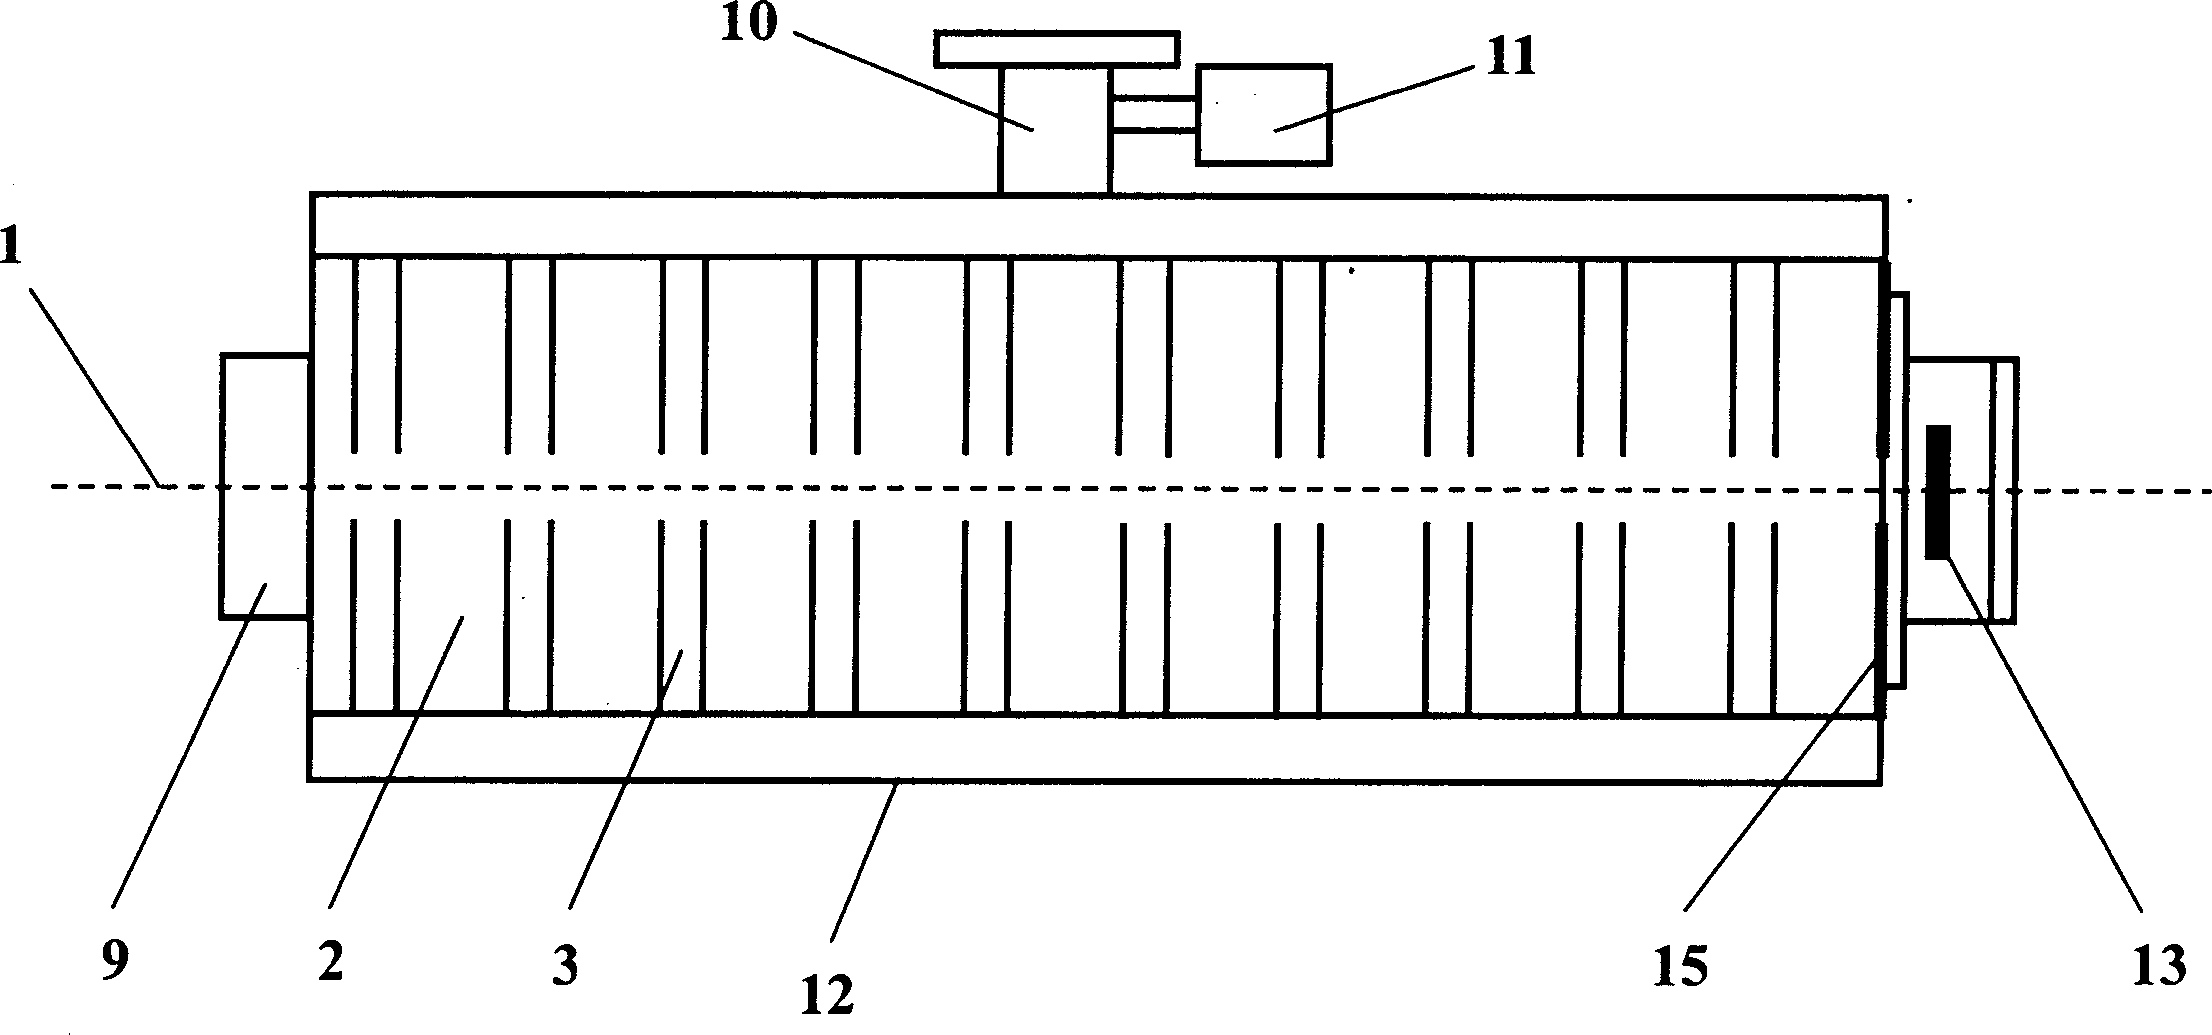 Standing wave electronic straight line accelerator